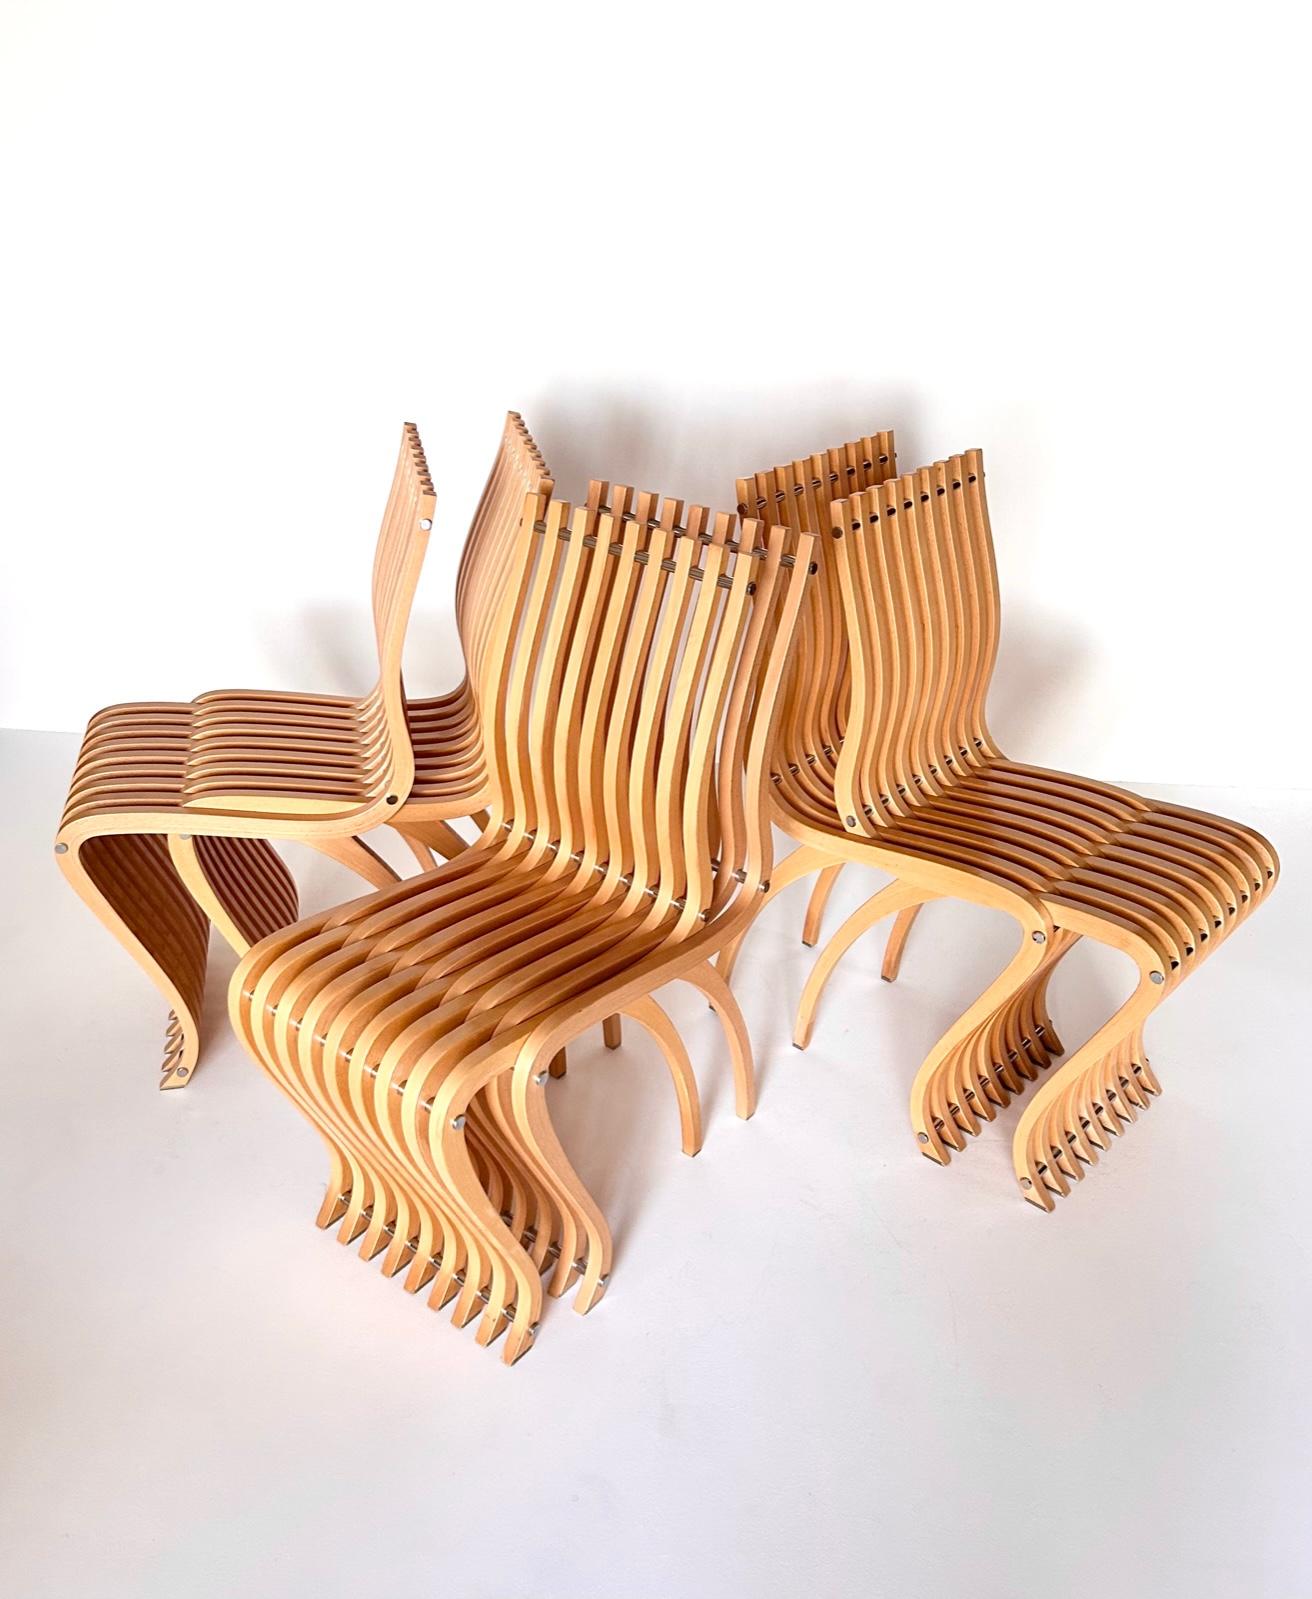 Steel Set of 6 Schizzo chairs by Ron Arad, Vitra, 1989